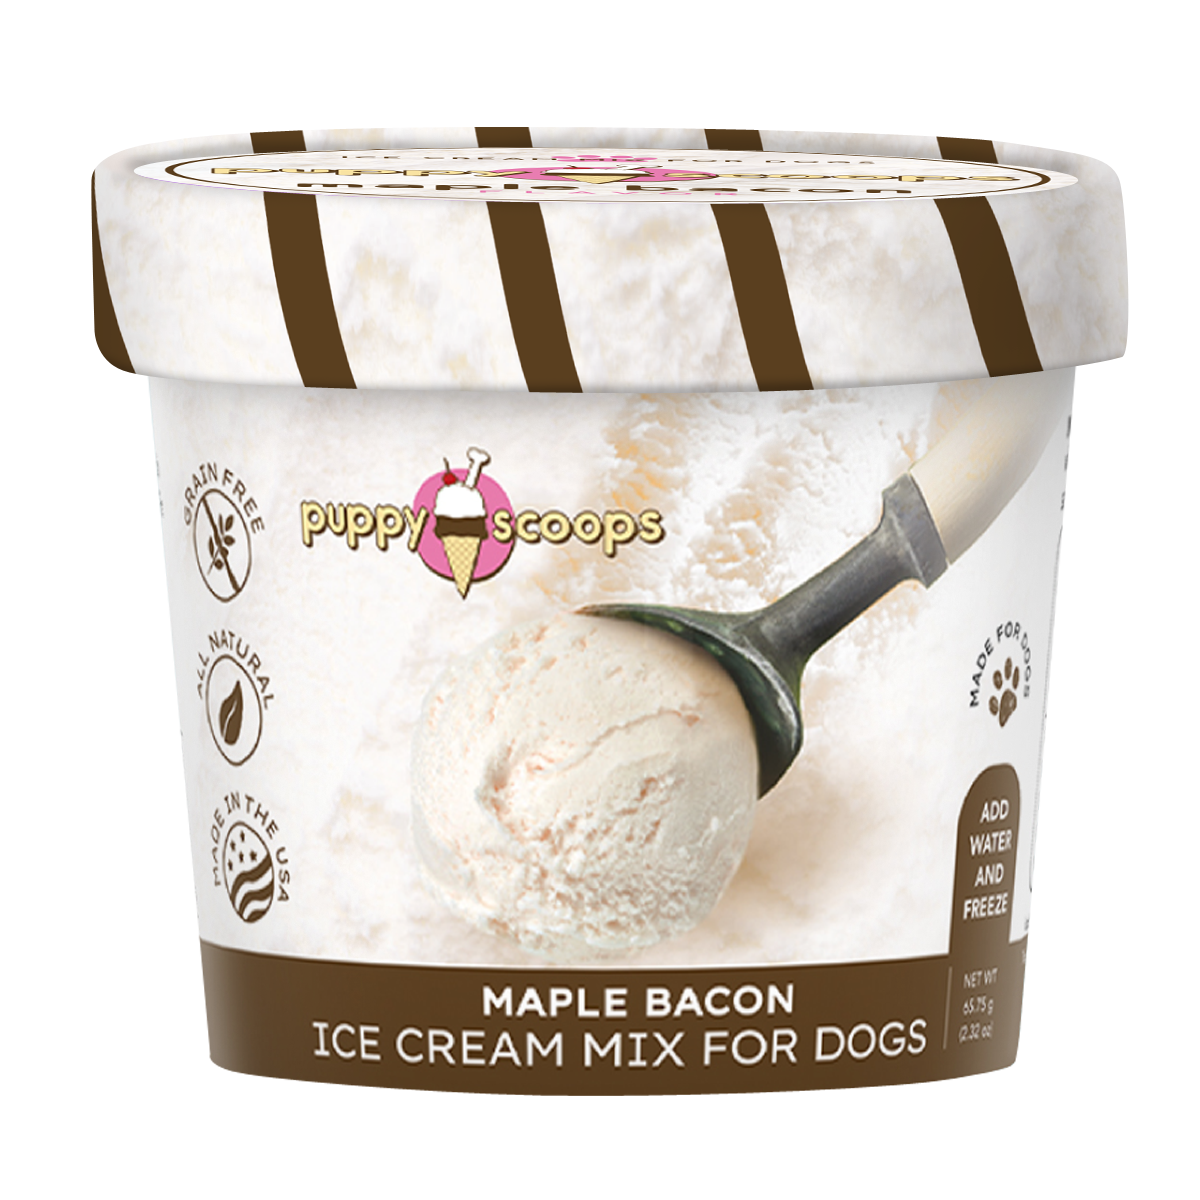 Puppy Scoops Ice Cream Mix For Dogs - Maple Bacon